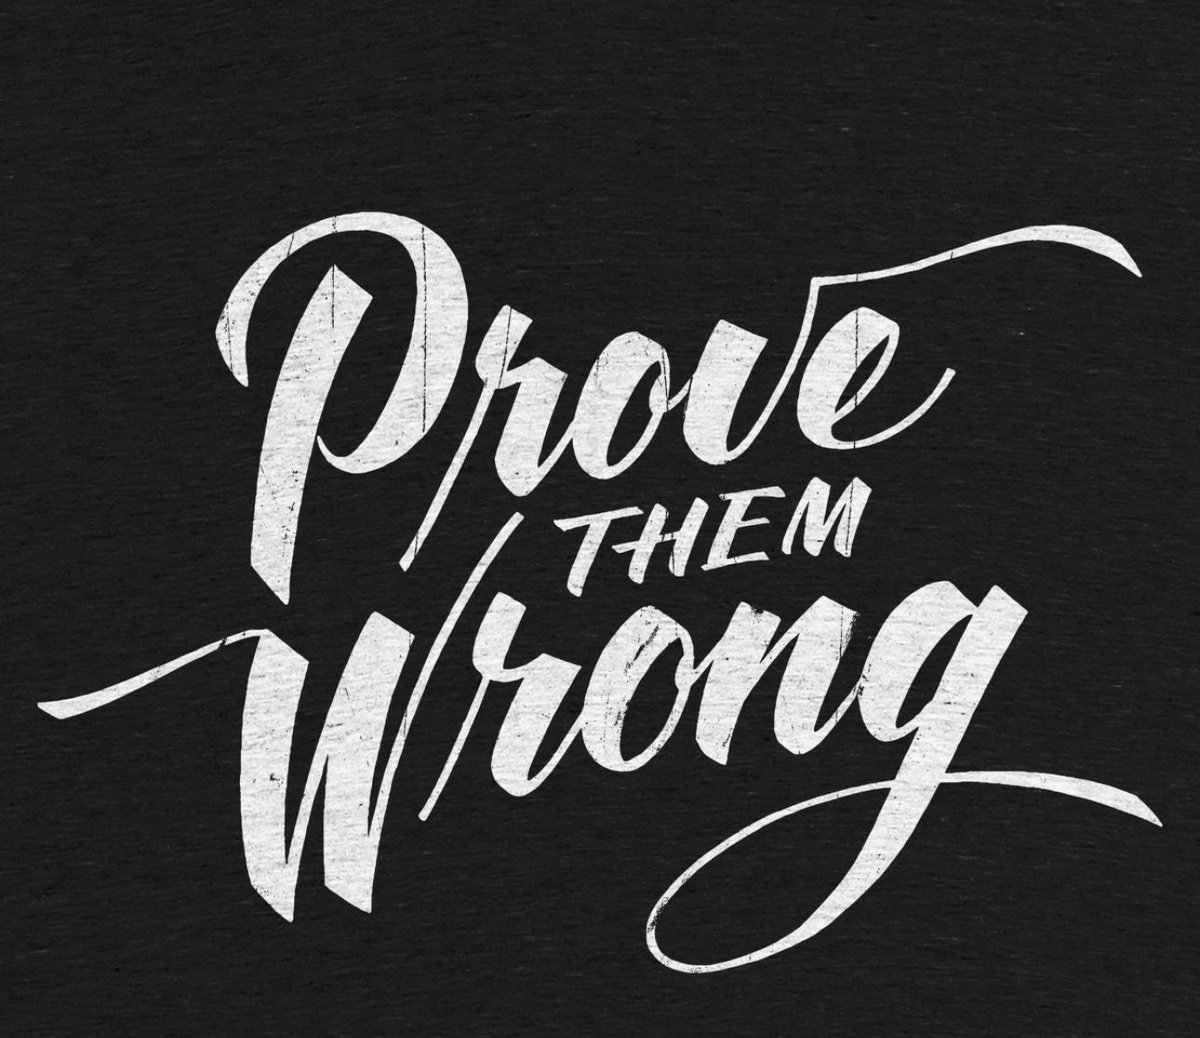 There will be those who hate, those who doubt, and those who don't believe. 
There will also be those who say it can't be done and call others' goals pipe dreams. 
Then there's YOU, proving them wrong.
#provethemwrong #youcandothis 
#Believe #BelieveInYourself